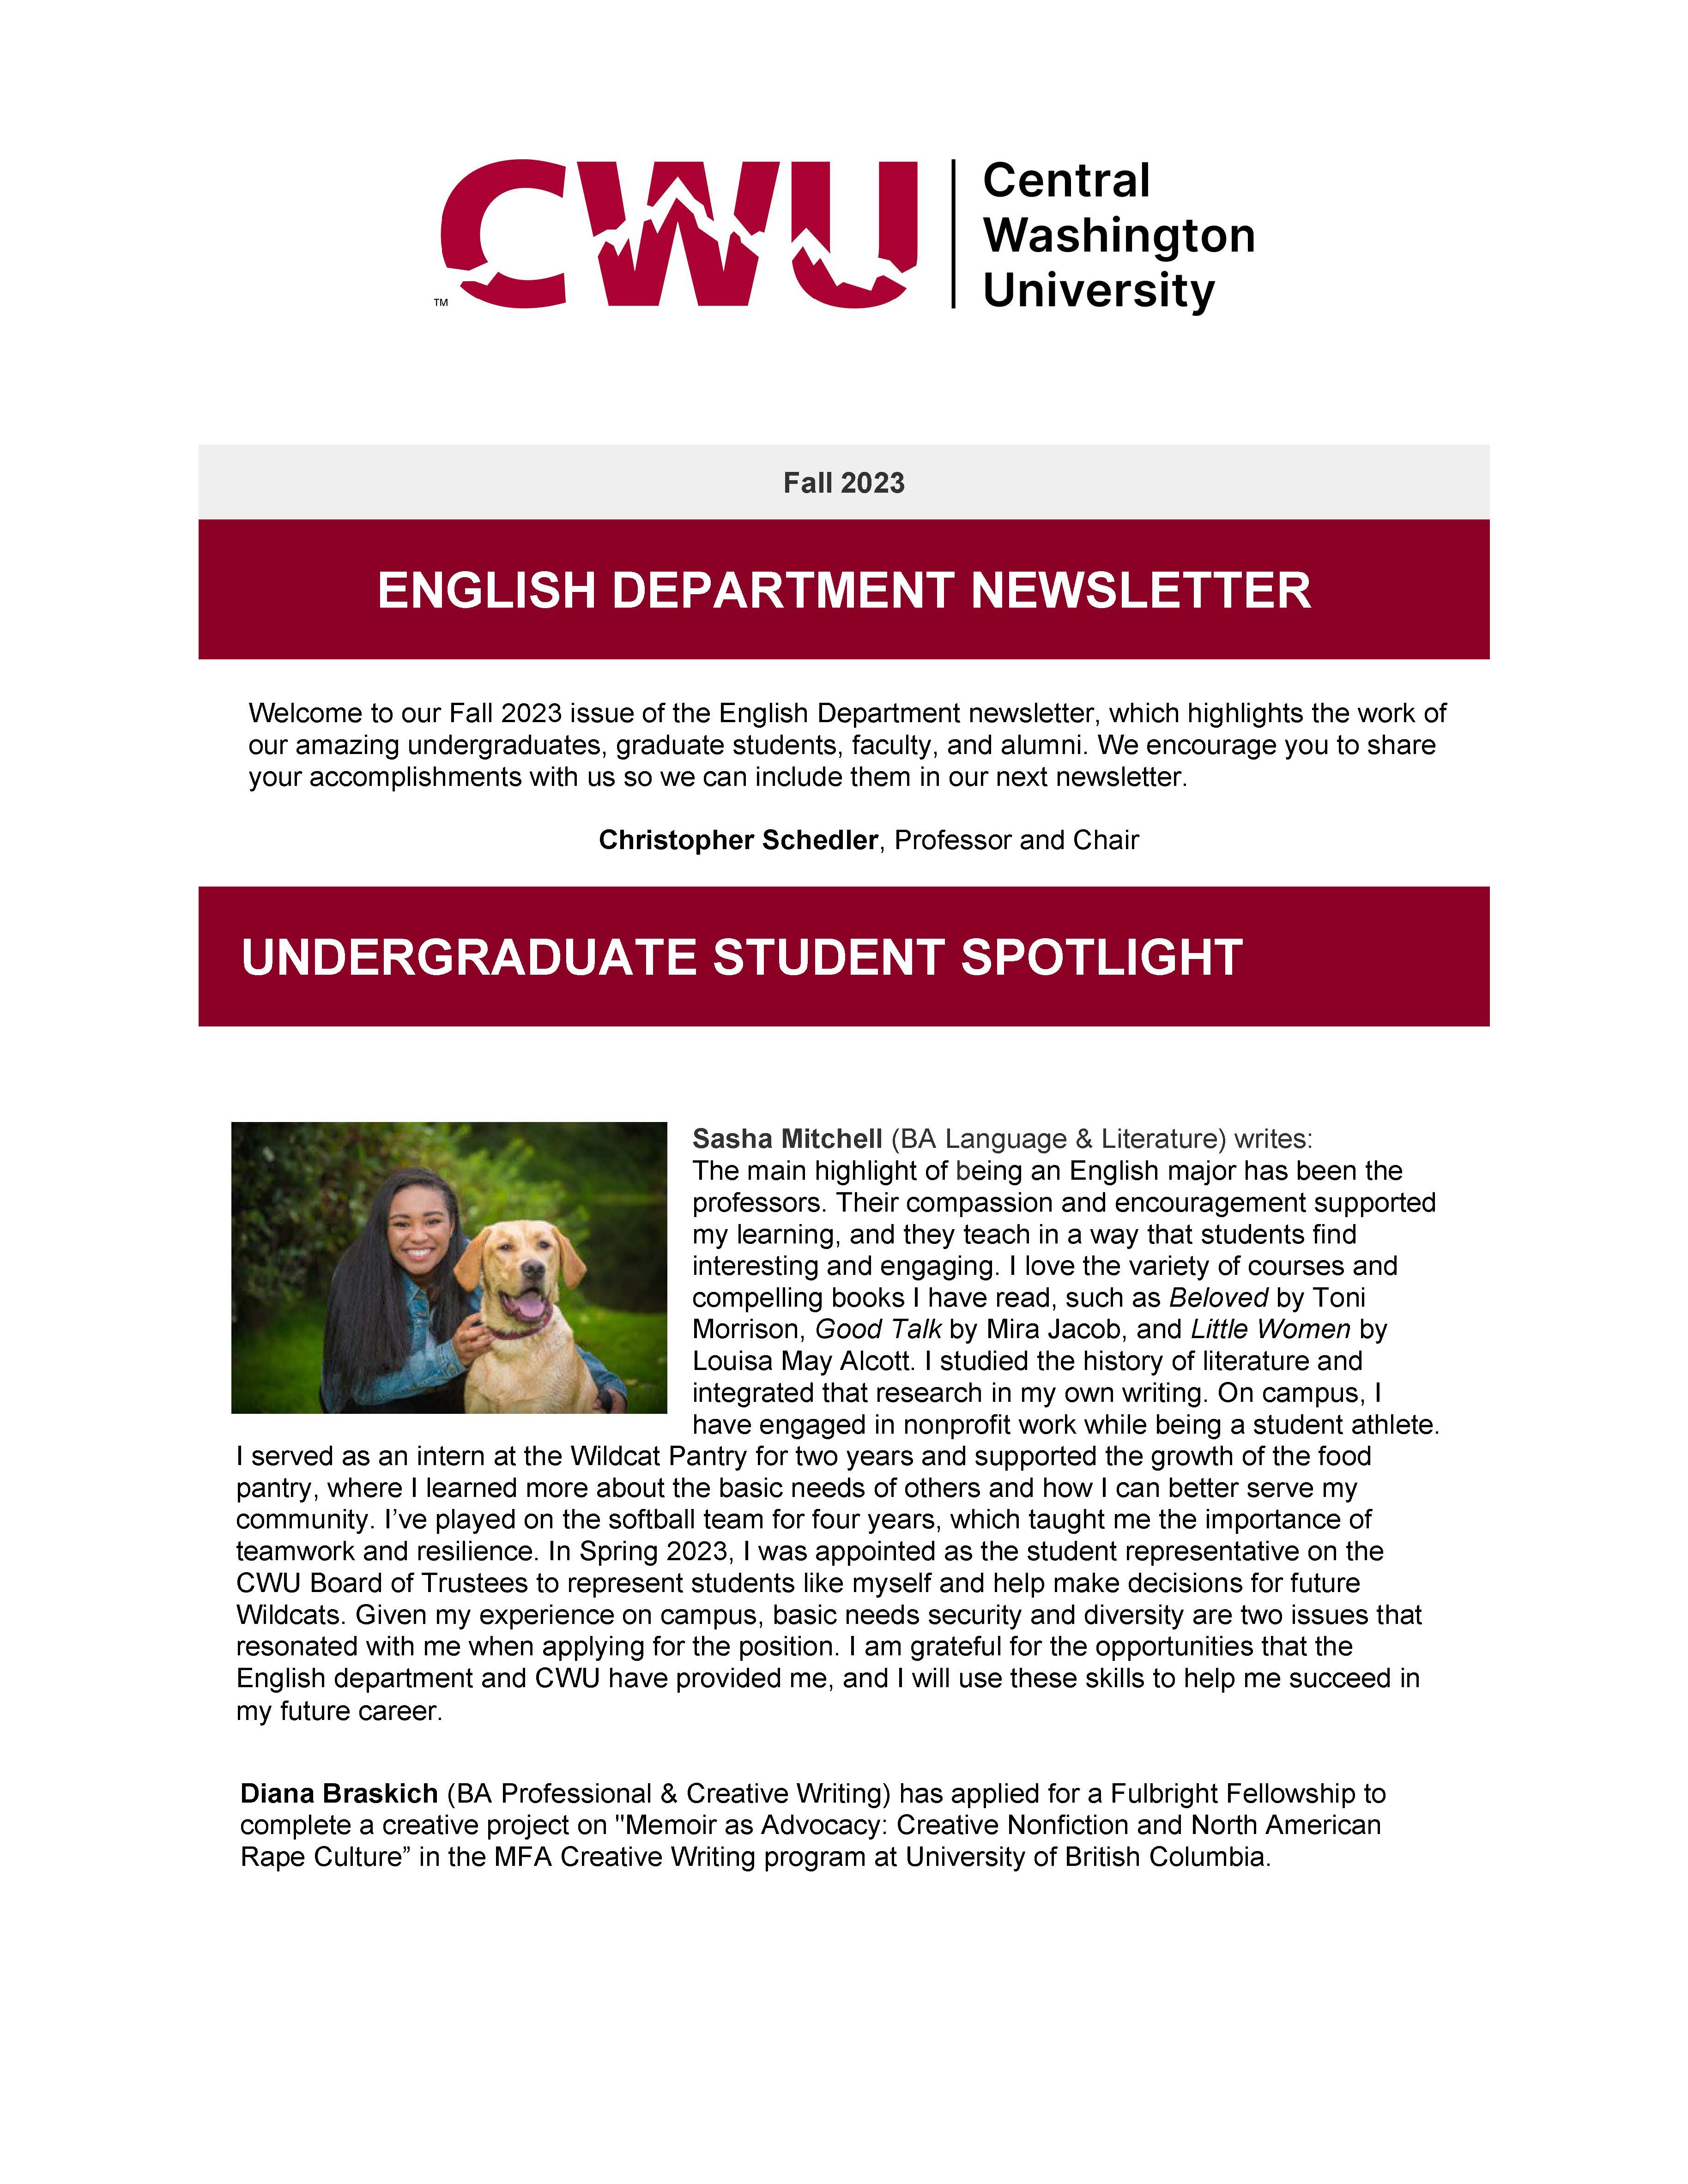 First page of Fall 2023 English Newsletter